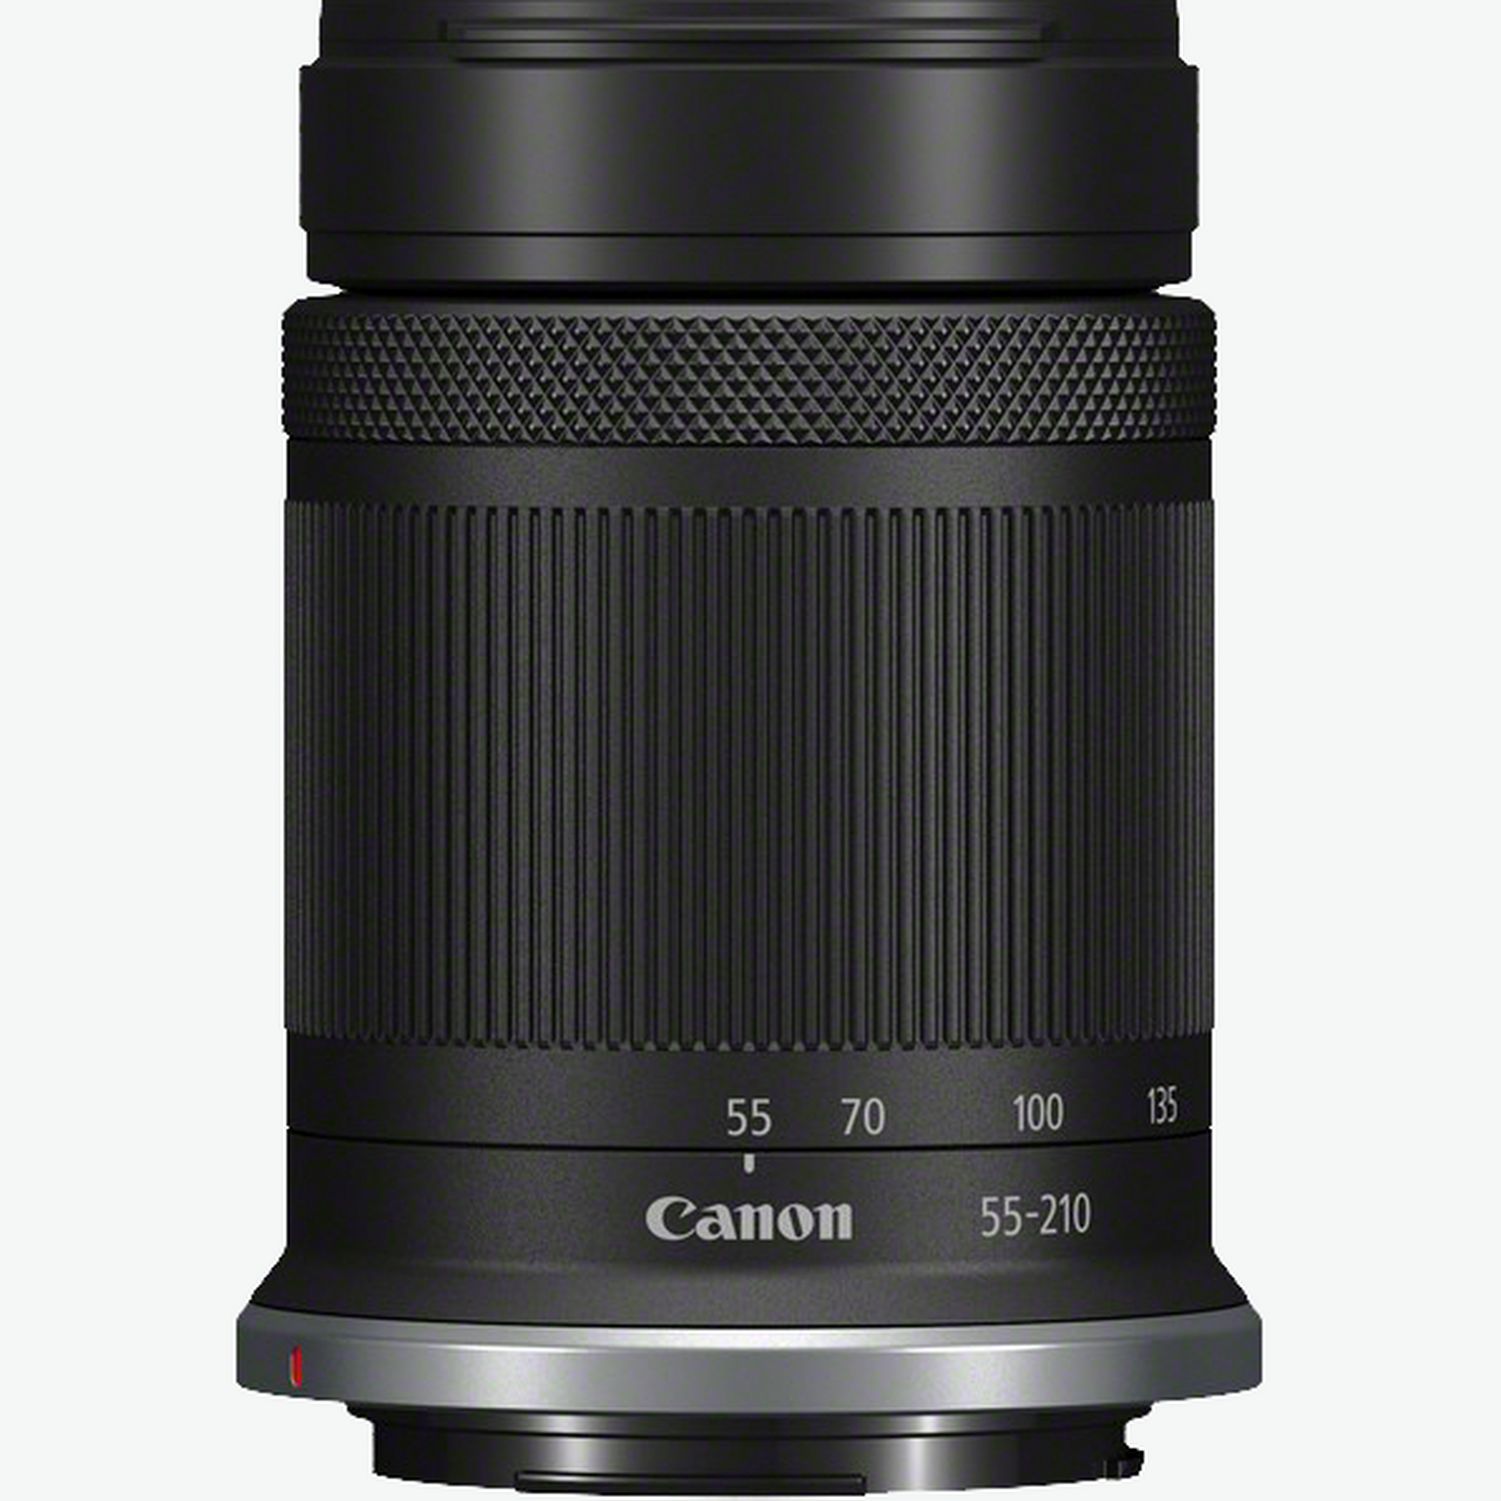 Canon R100 Camera and Canon RF 100-400mm F5.6-8 Lens